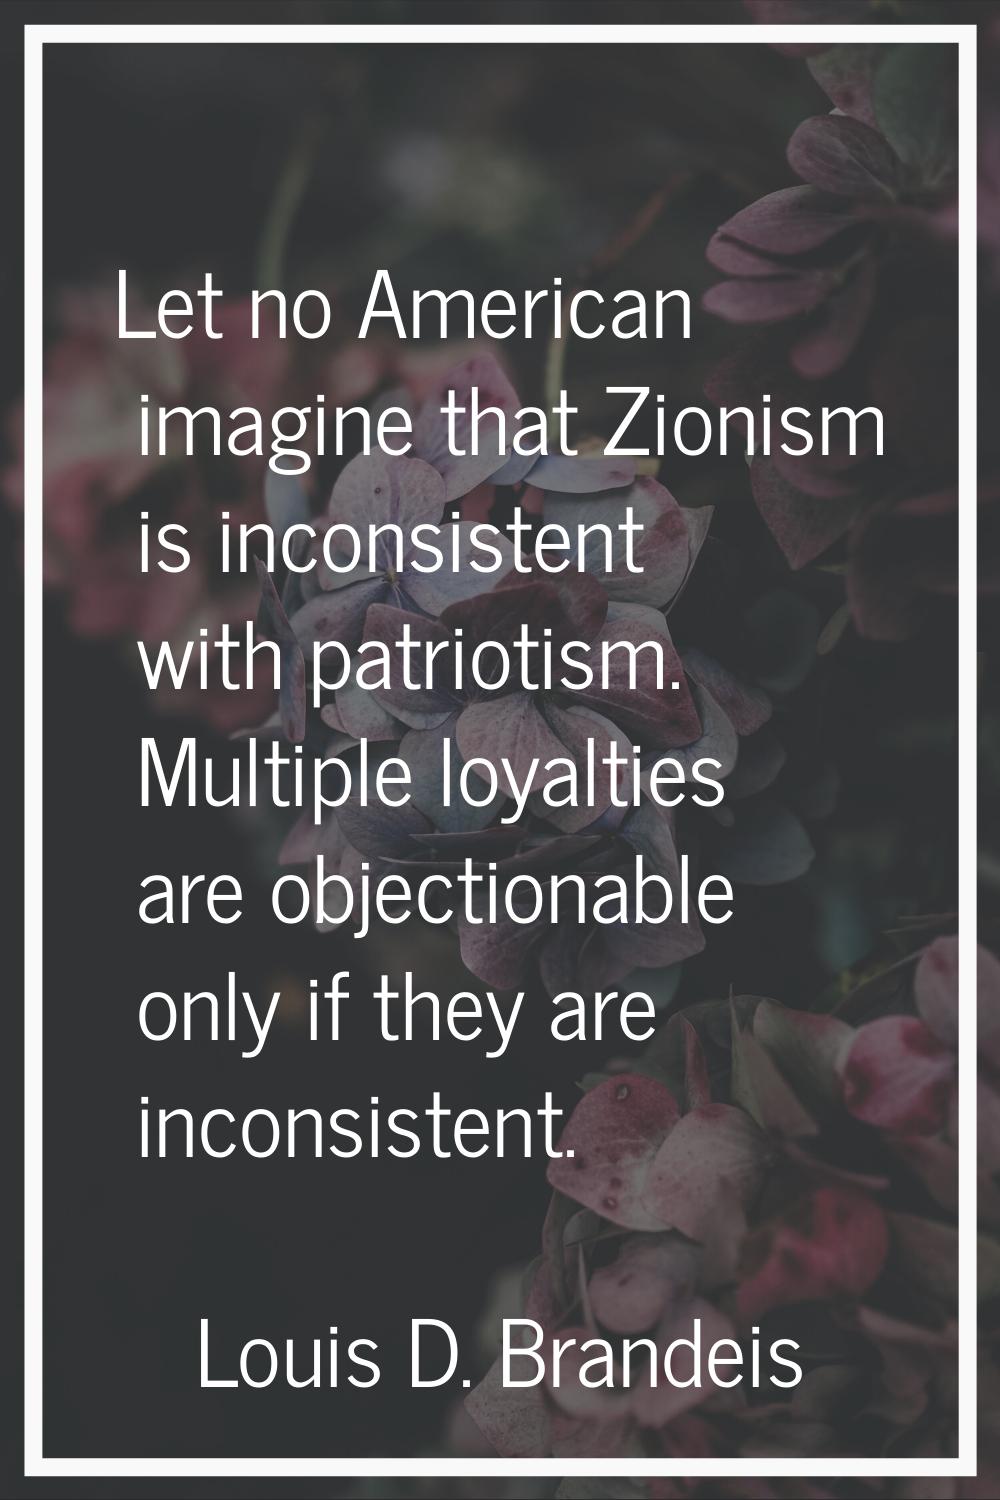 Let no American imagine that Zionism is inconsistent with patriotism. Multiple loyalties are object